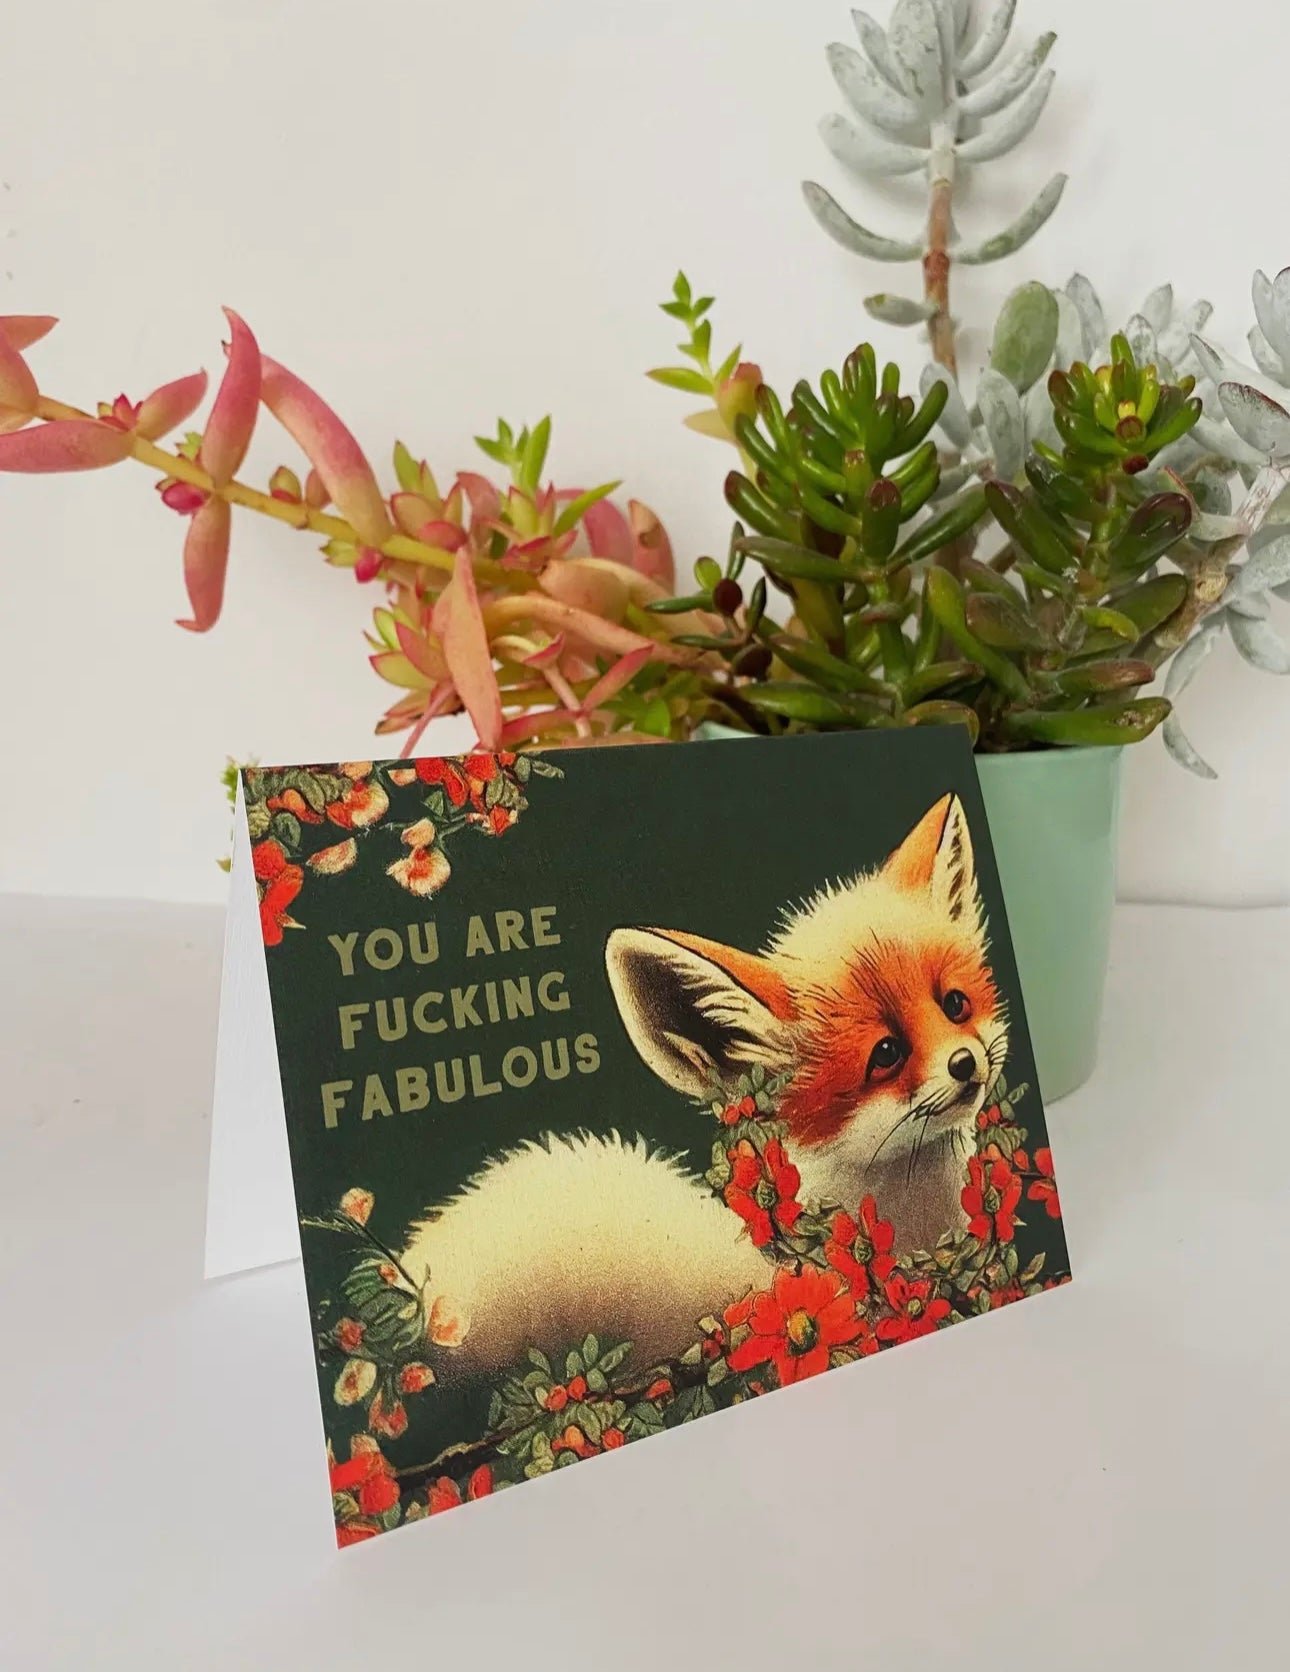 You are Fucking Fabulous! Vintage Fox Design Funny Love Encouragement Greeting Card